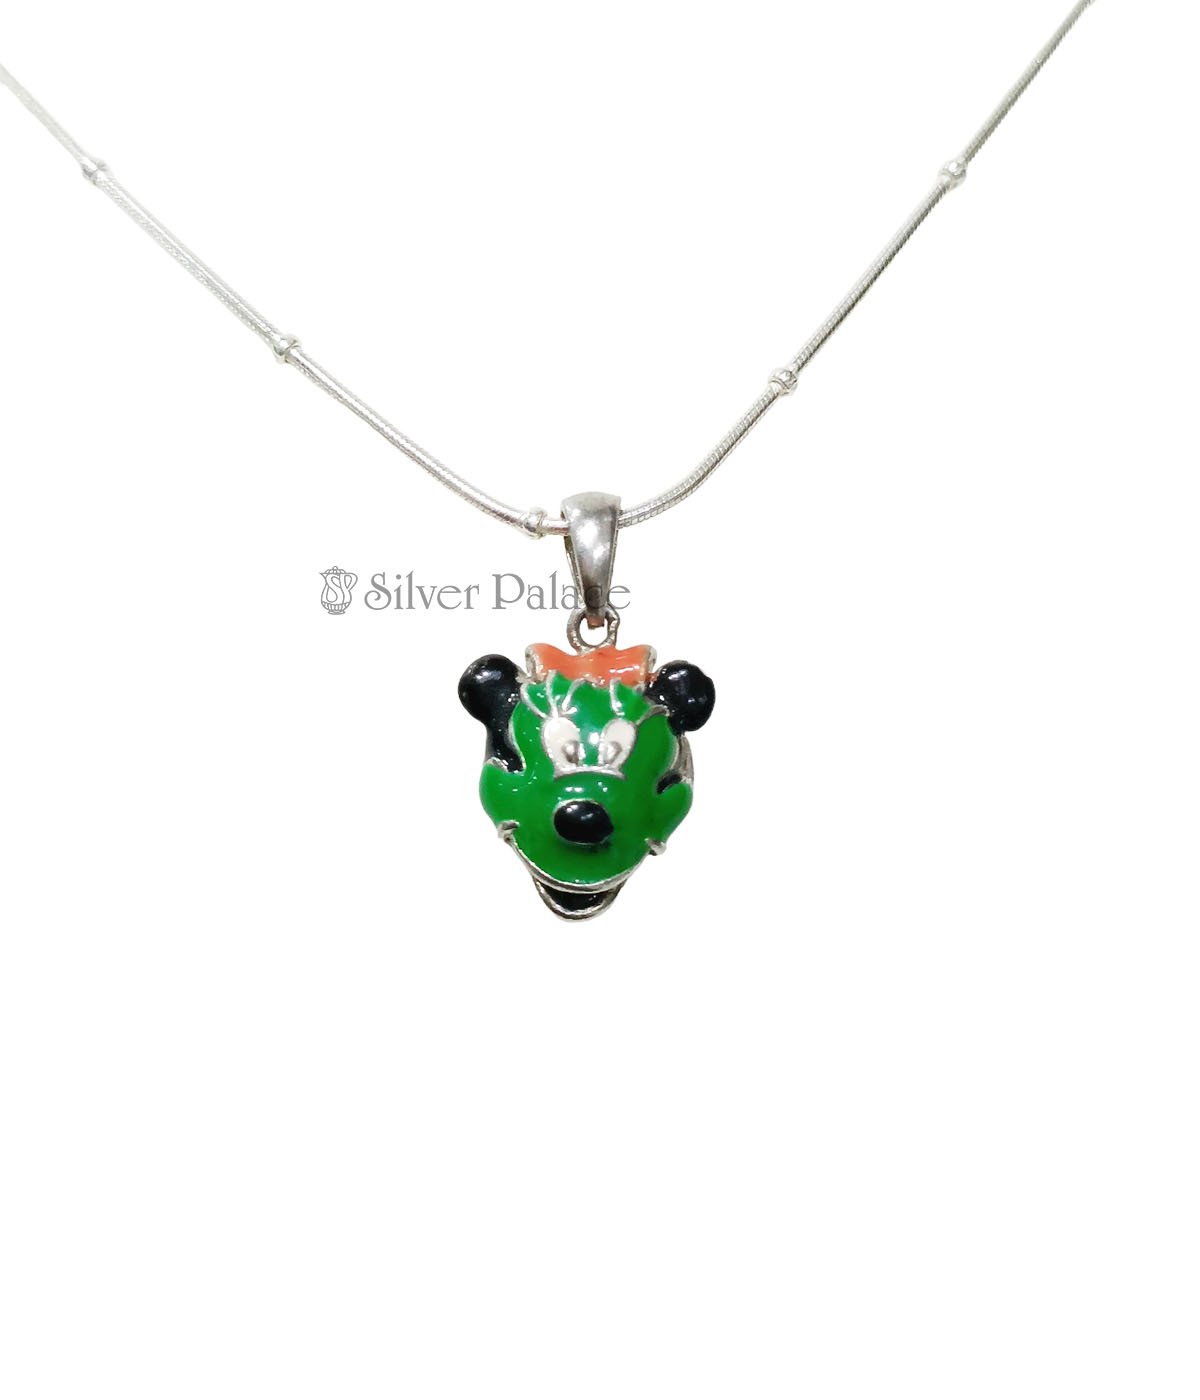 92.5 STERLING SILVER MICKEY MOUSE PENDANT FOR KIDS CHAIN